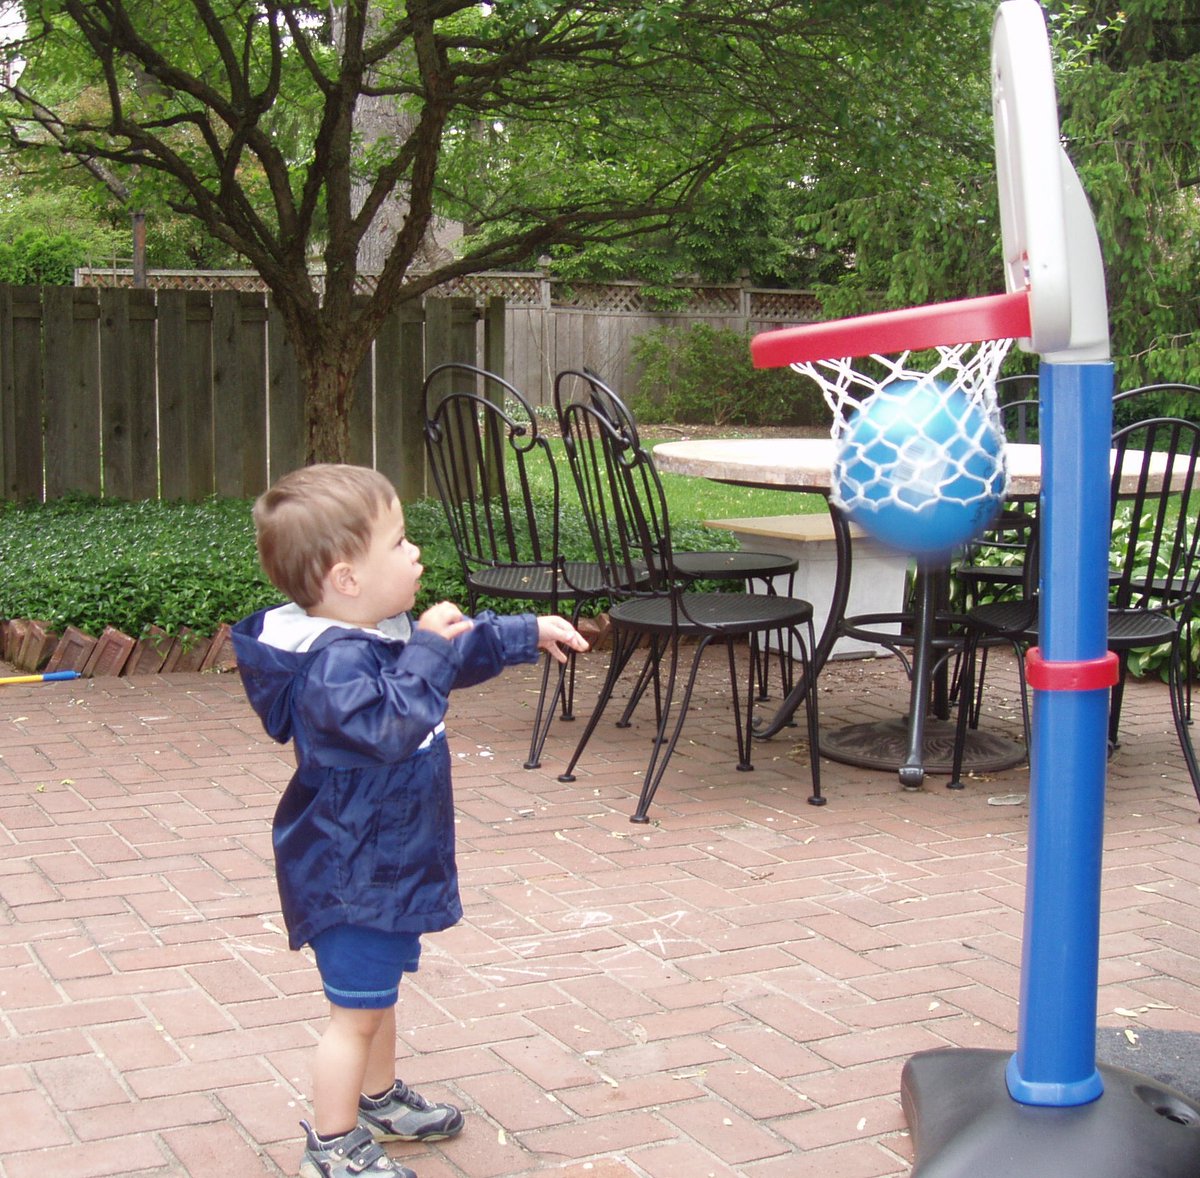 Shooting baskets requires balance, coordination and orientation.  Motor skill training must start early!